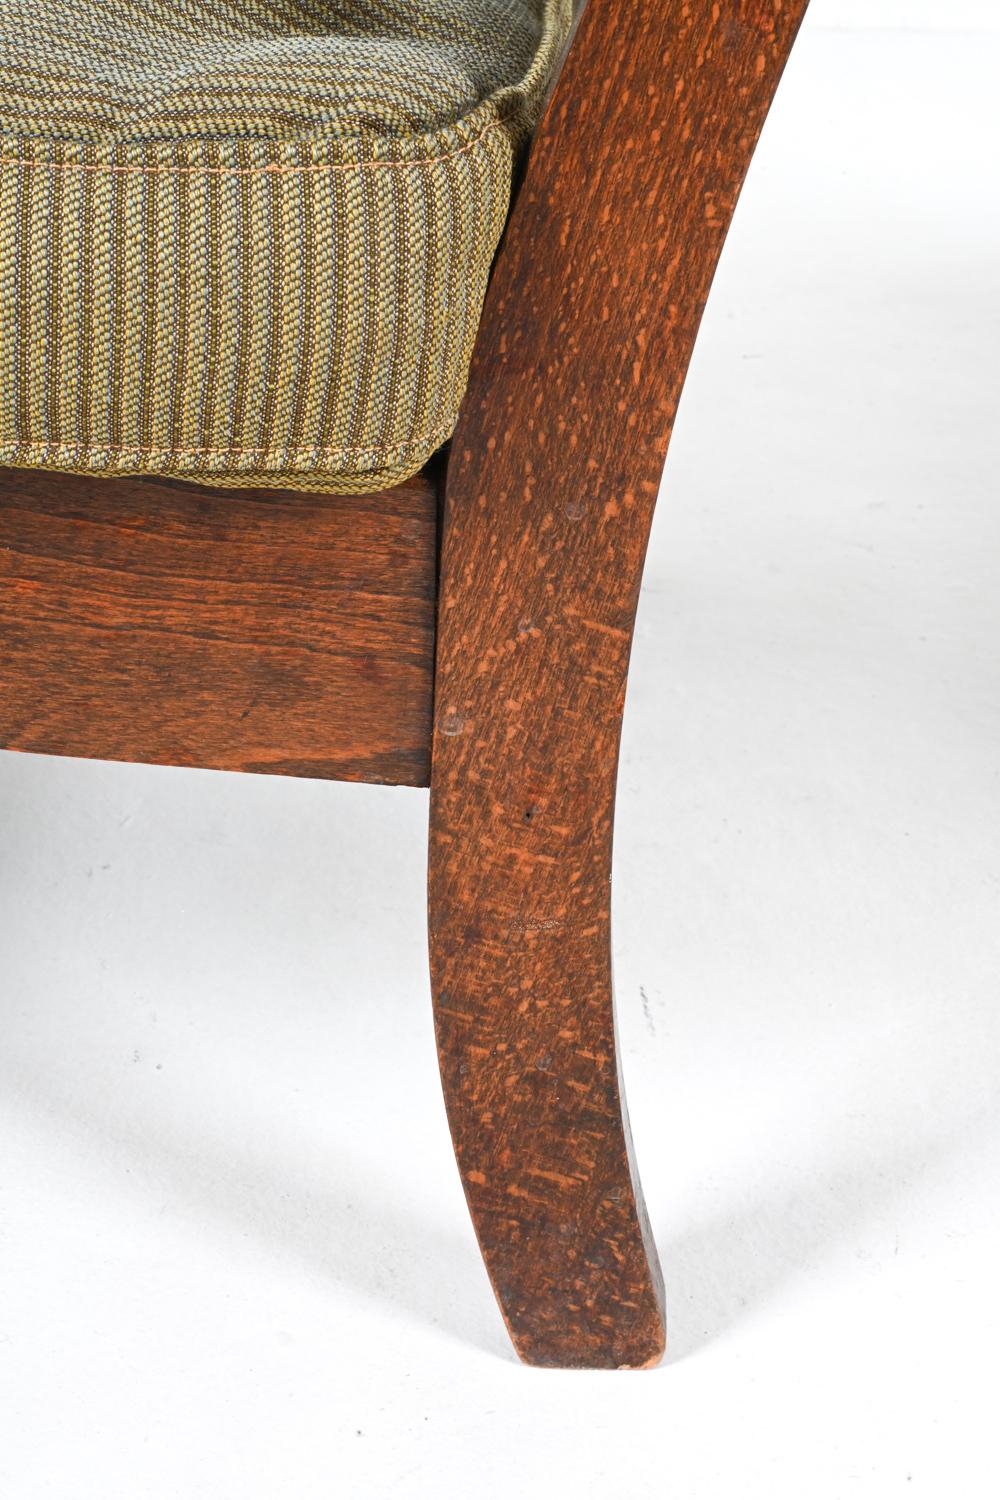 Pair of Art Deco Oak Lounge Chairs Attributed to Frits Schlegel for Fritz Hansen For Sale 6